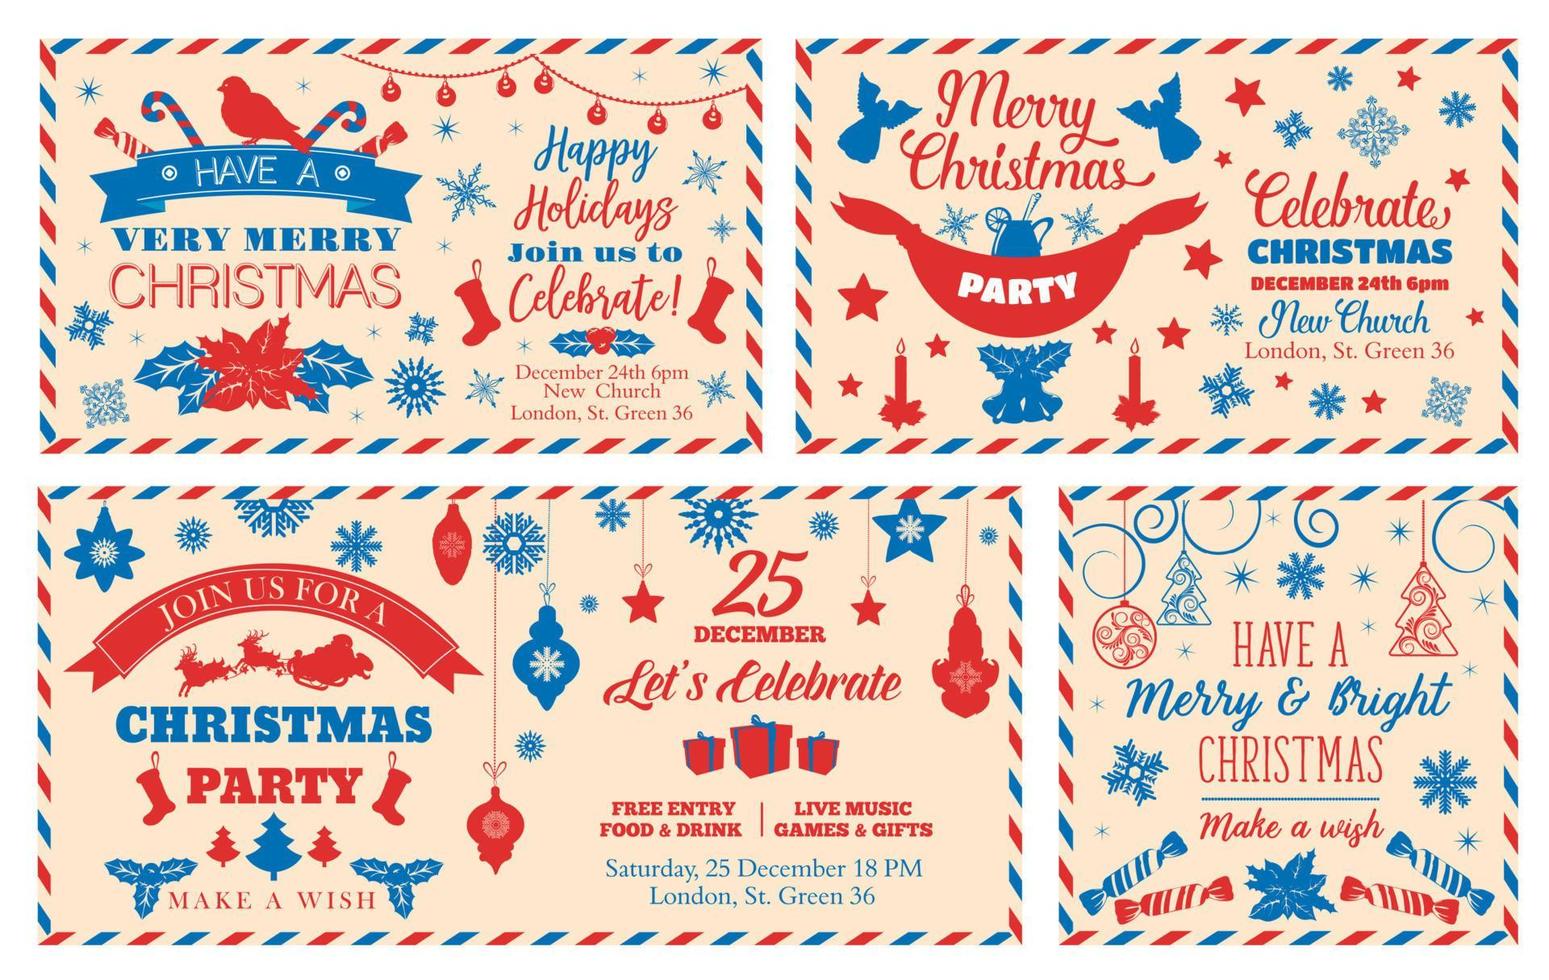 Letter for Santa, Christmas holidays mail vector